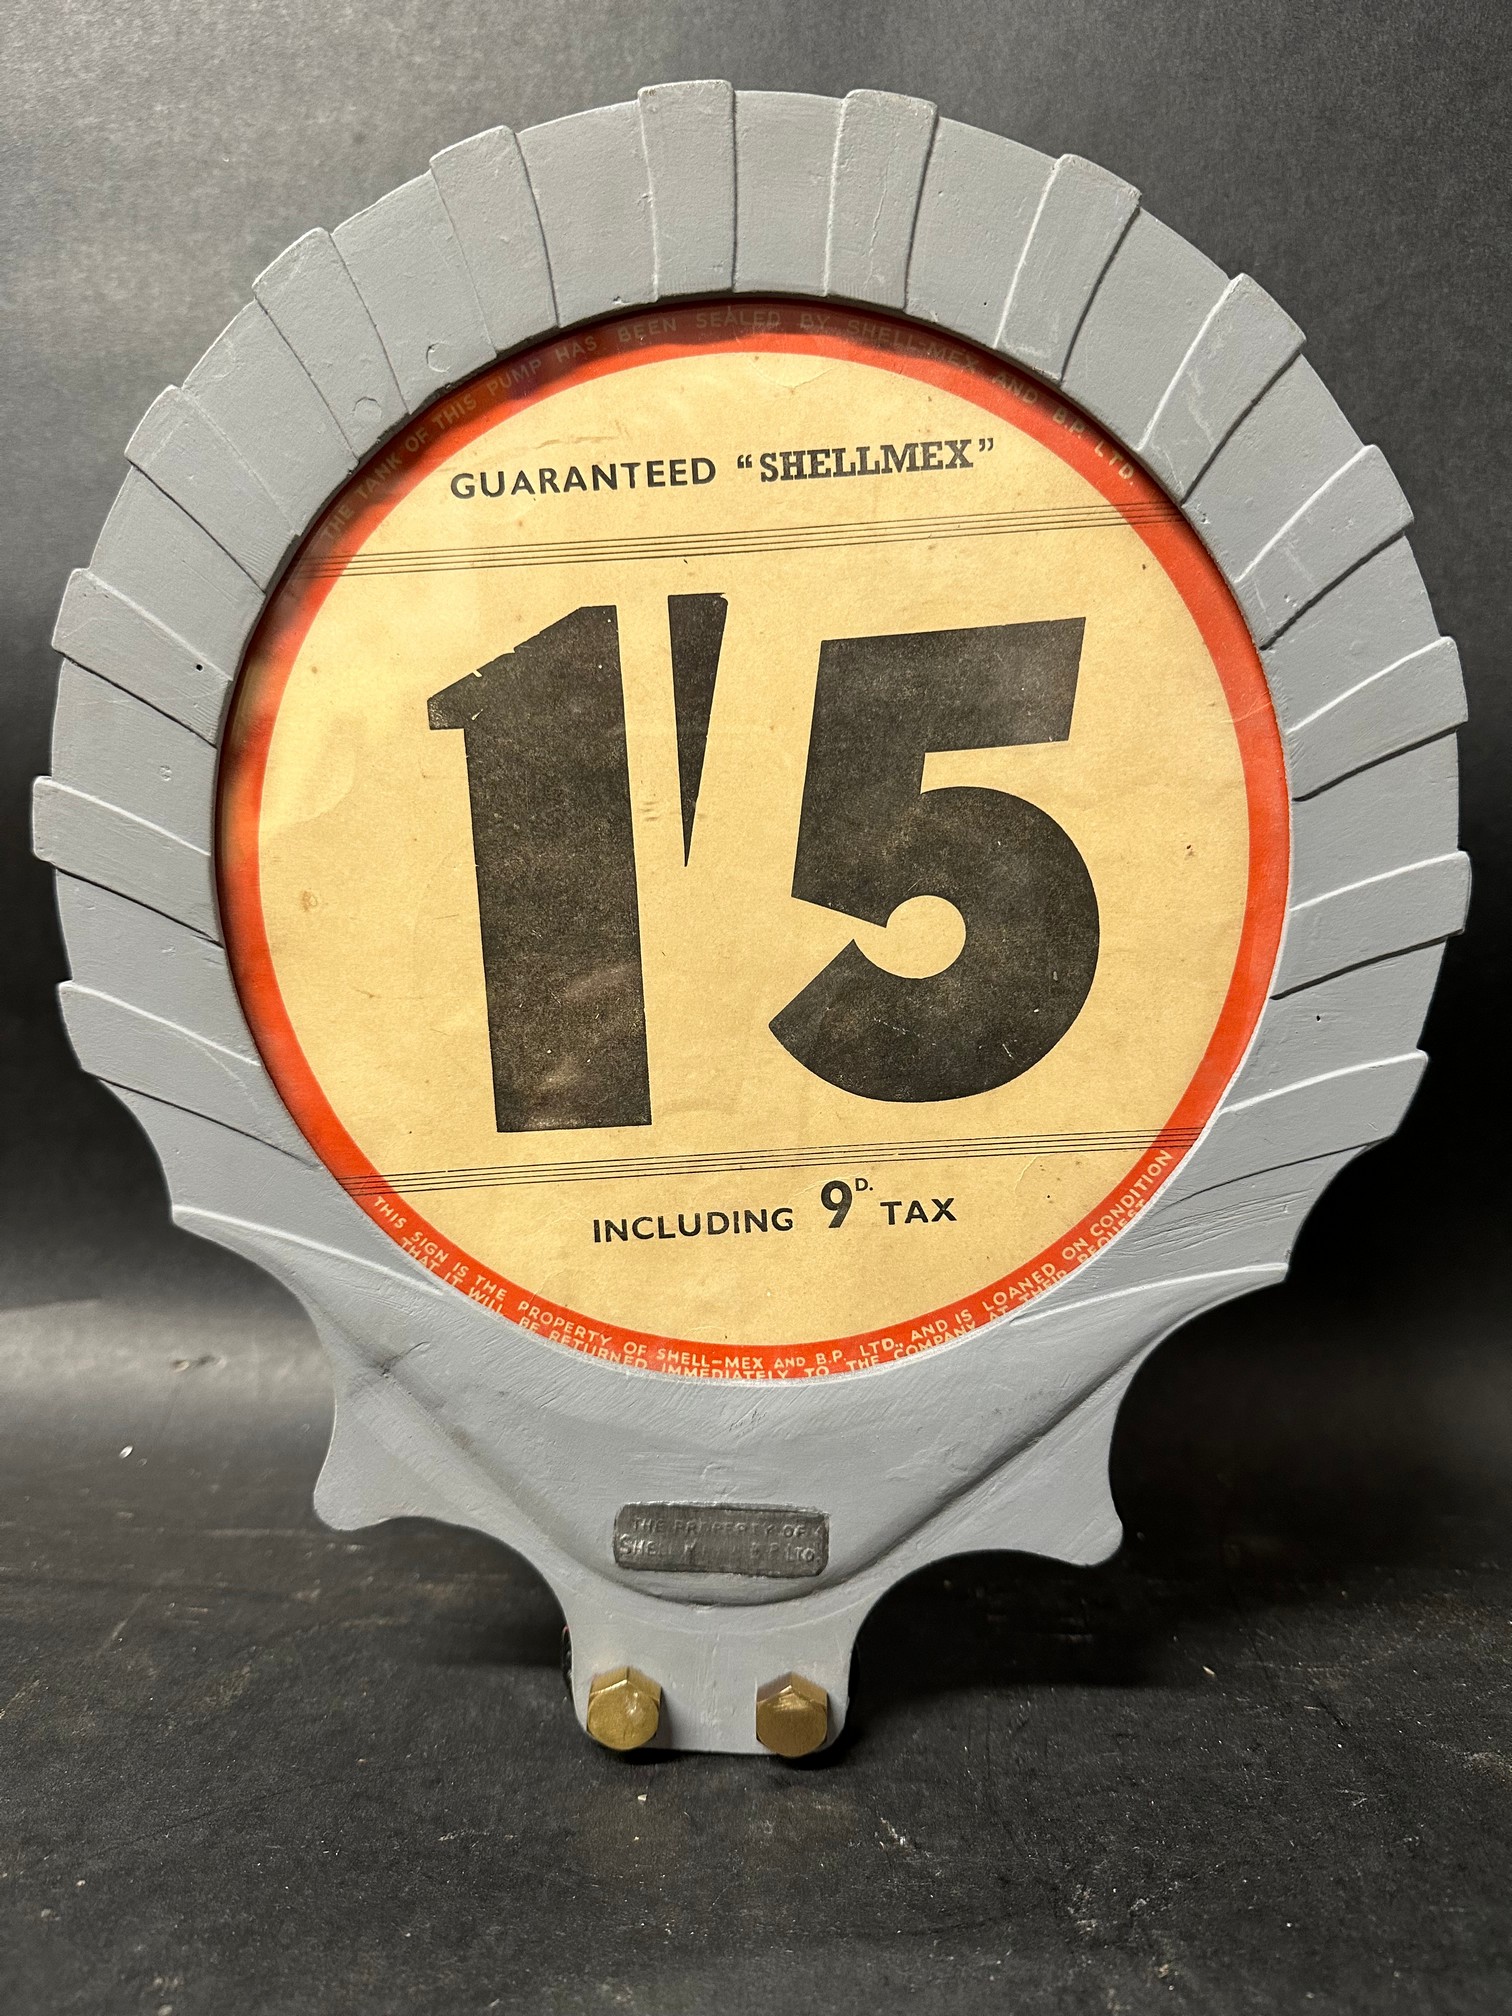 A Shell Mex petrol pump price tag (restored). - Image 2 of 2